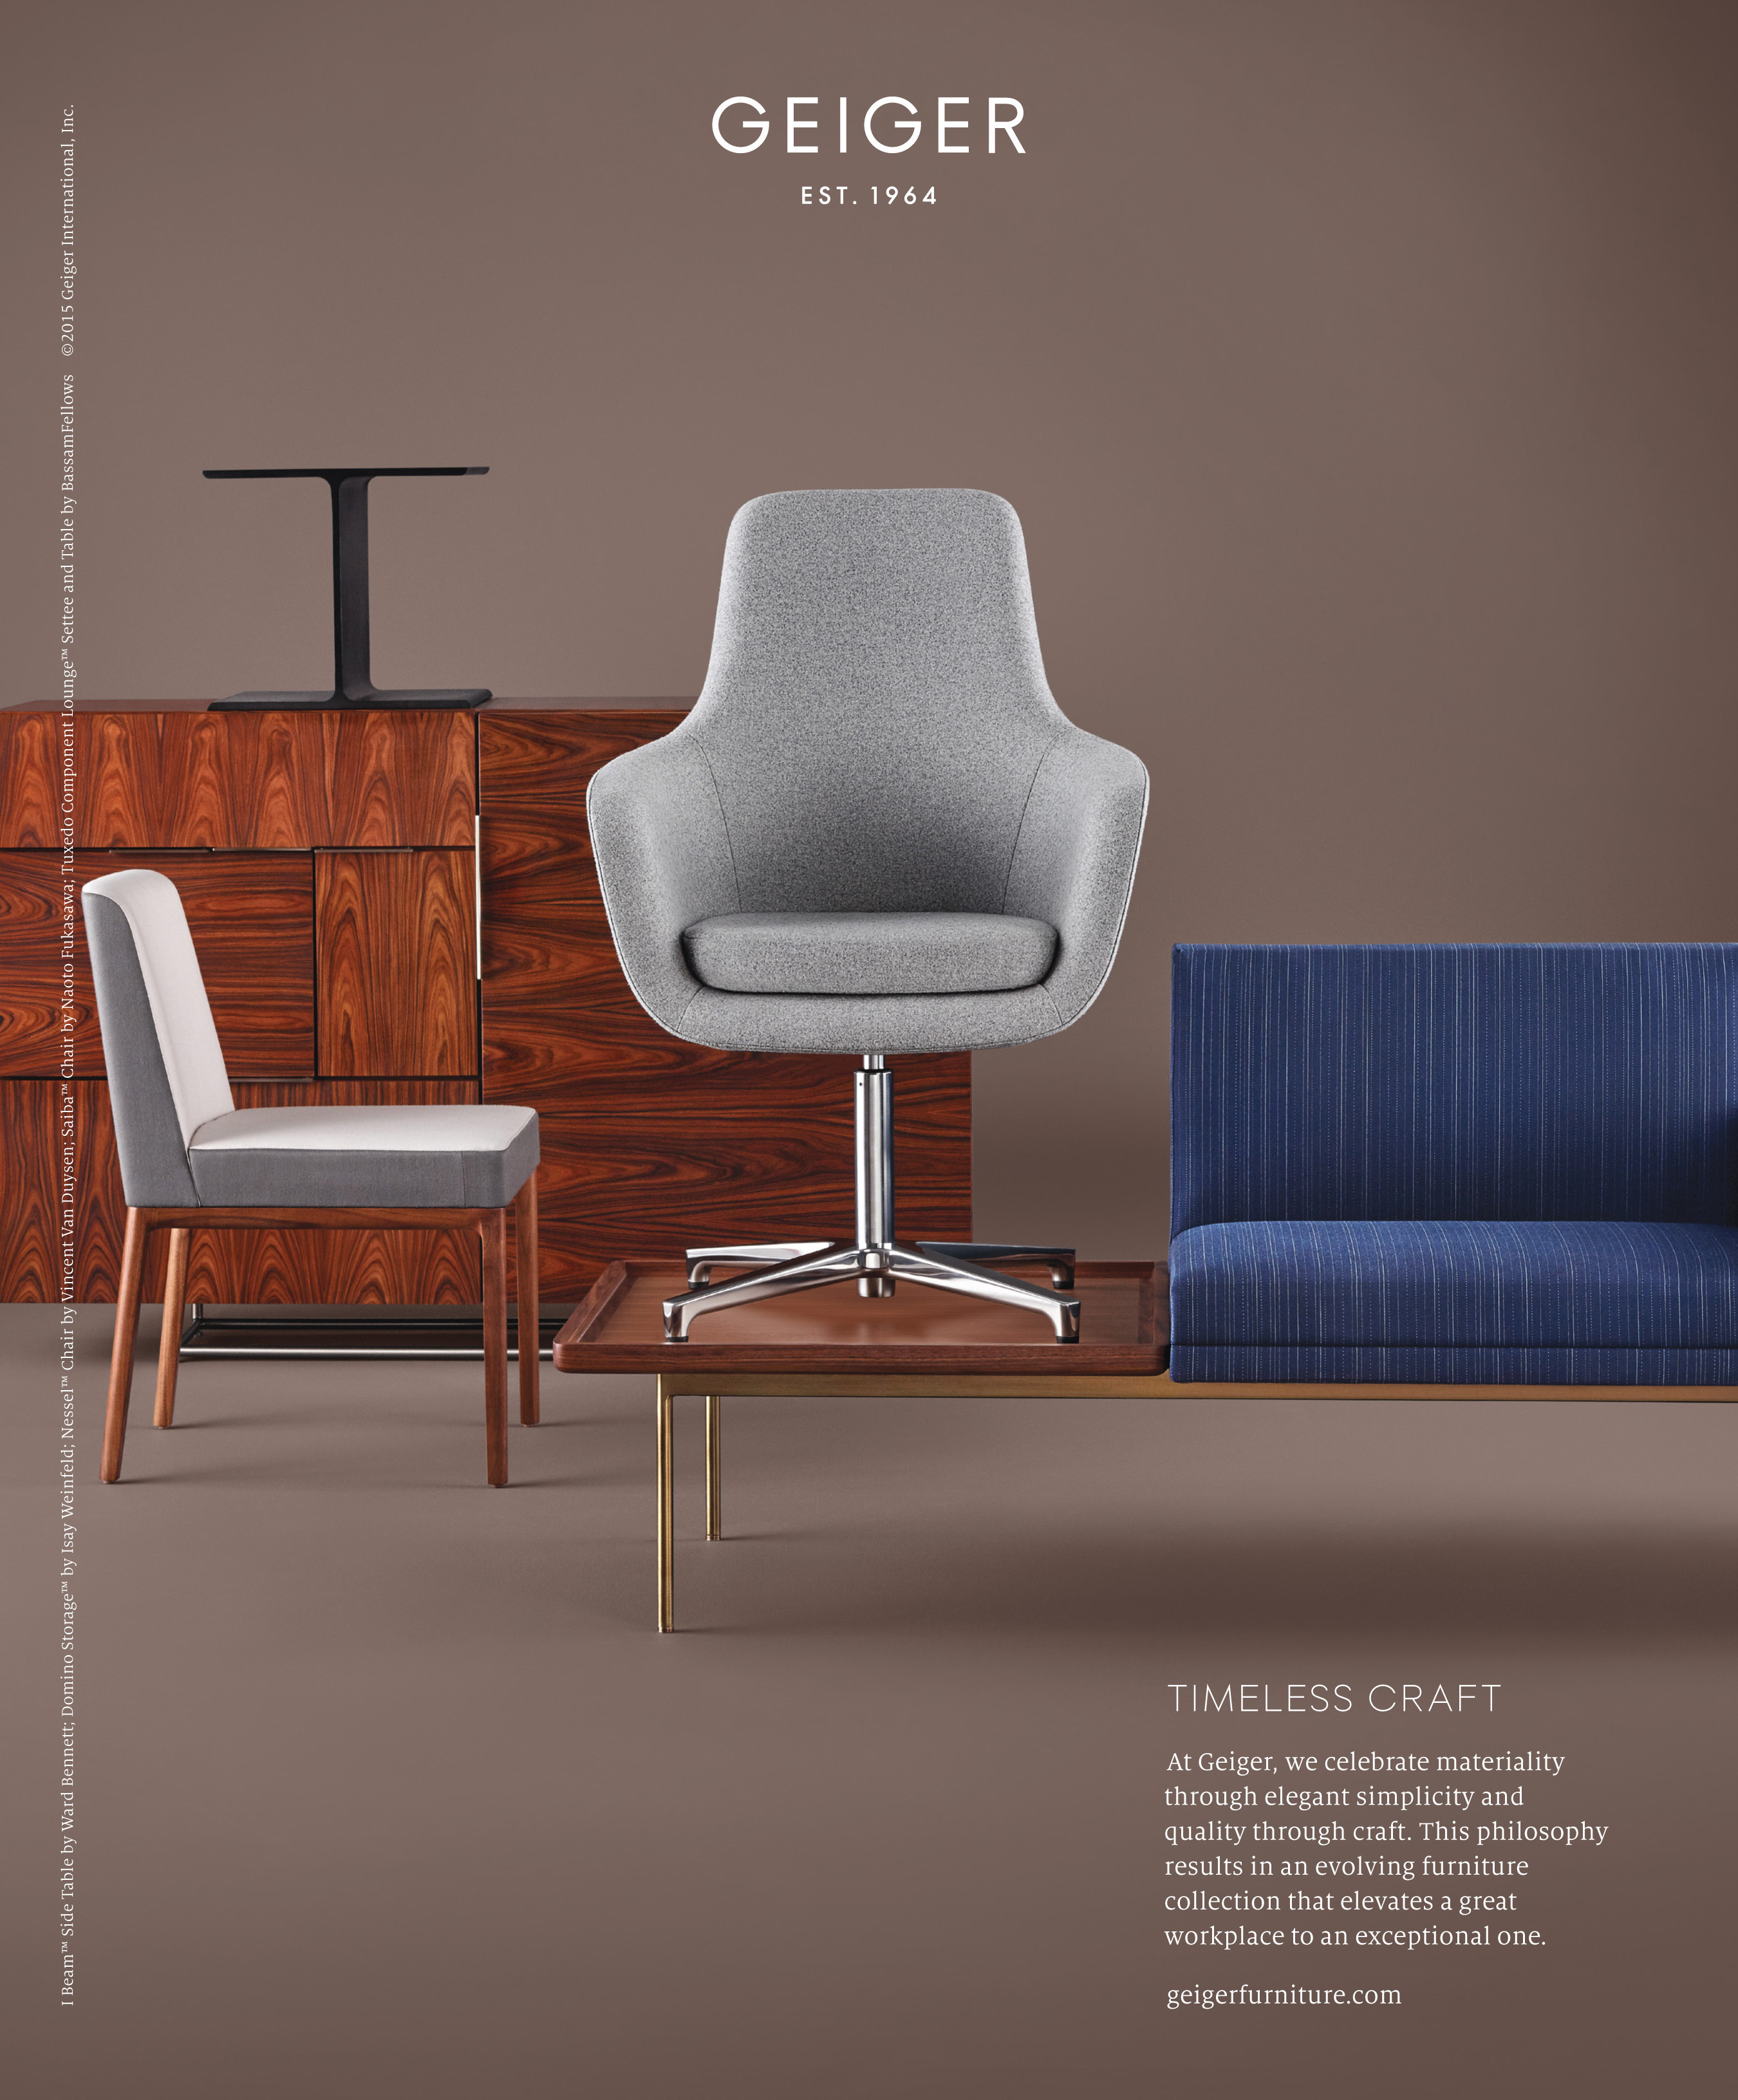 Nessel Chair For Geiger Featured In Fall 2015 Campaign En